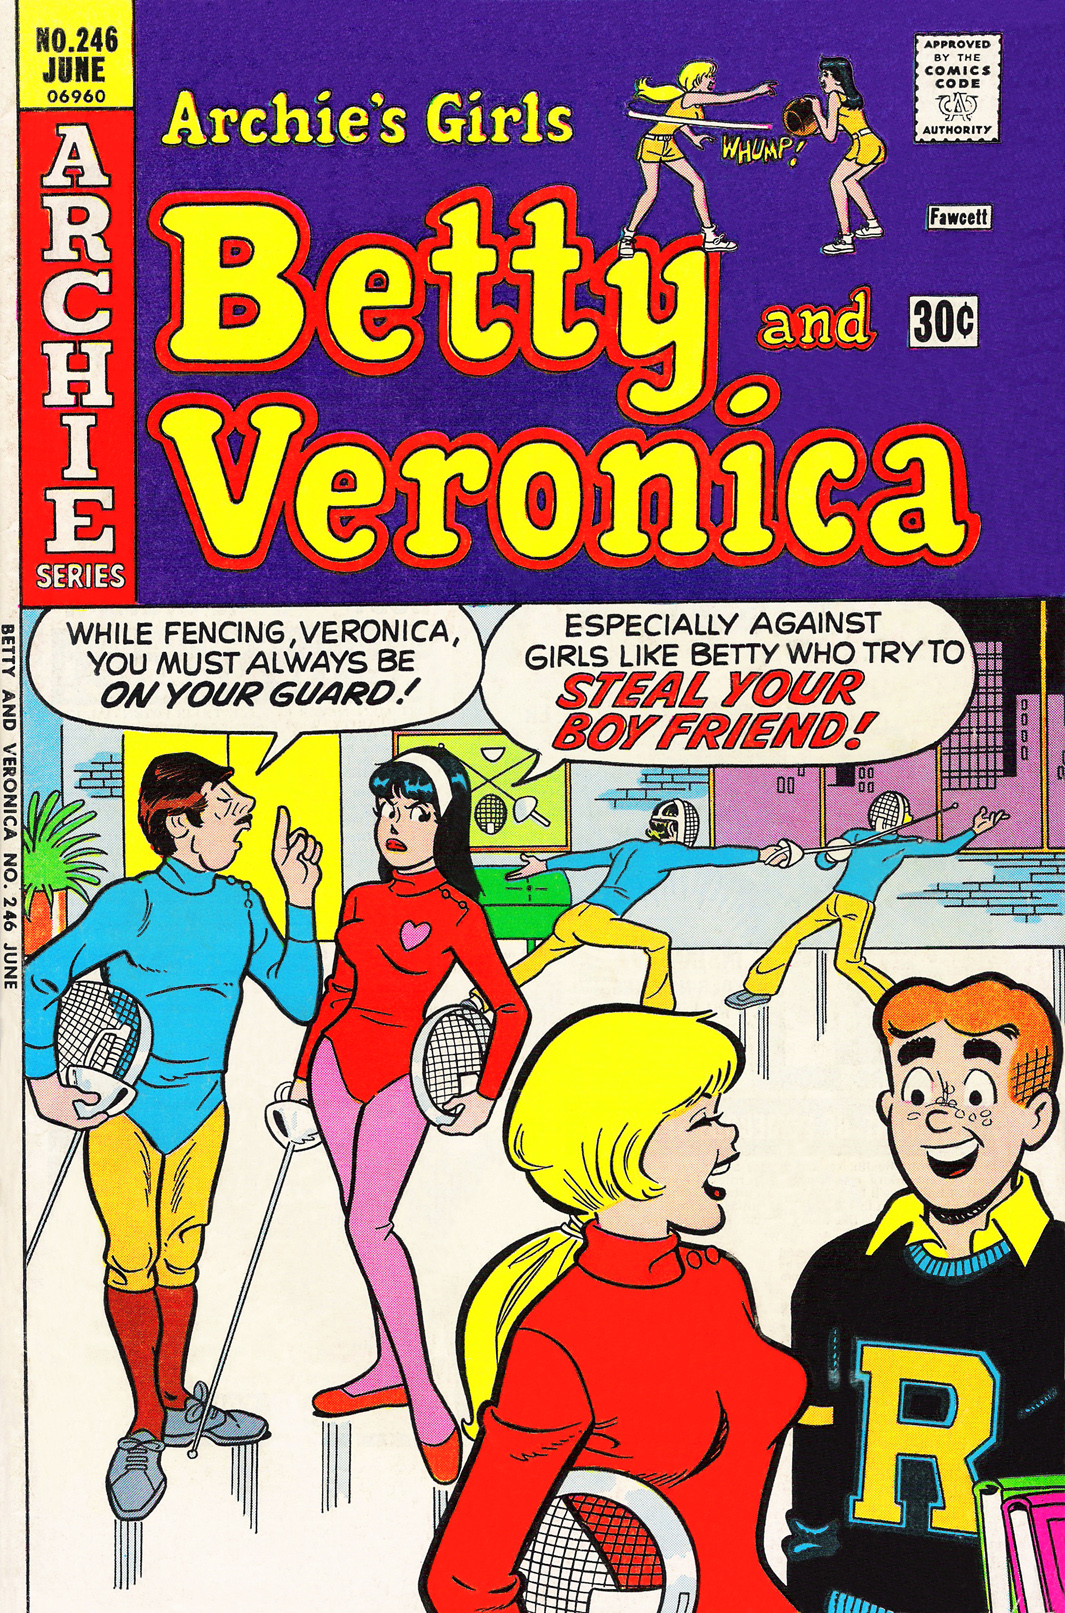 Read online Archie's Girls Betty and Veronica comic -  Issue #246 - 1